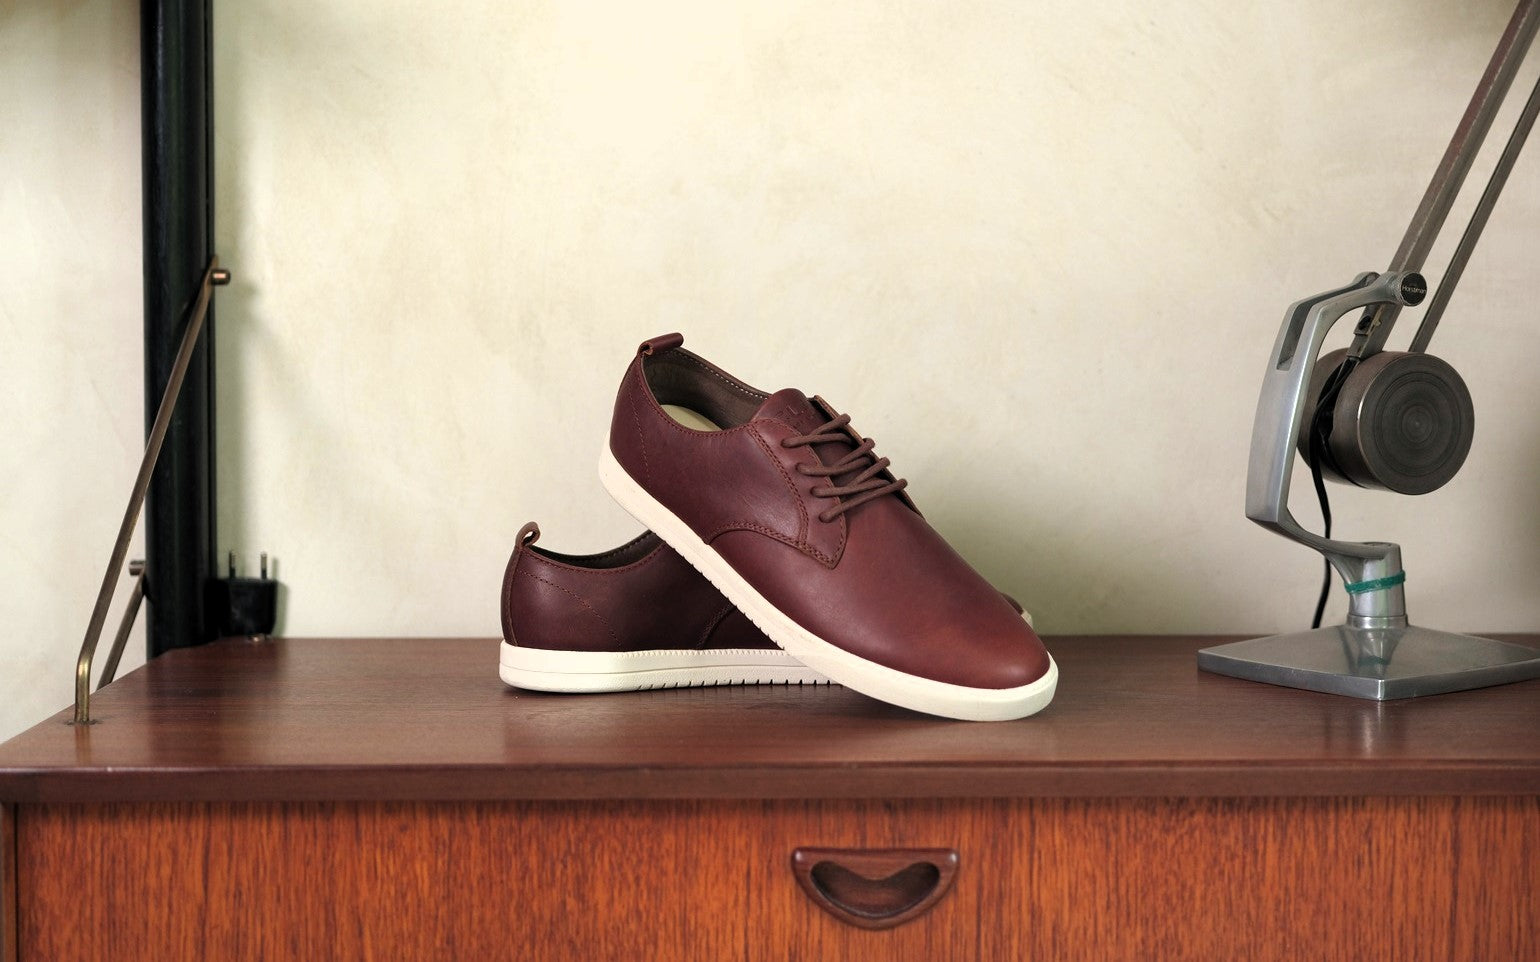 Heritage Collection - CLAE Footwear